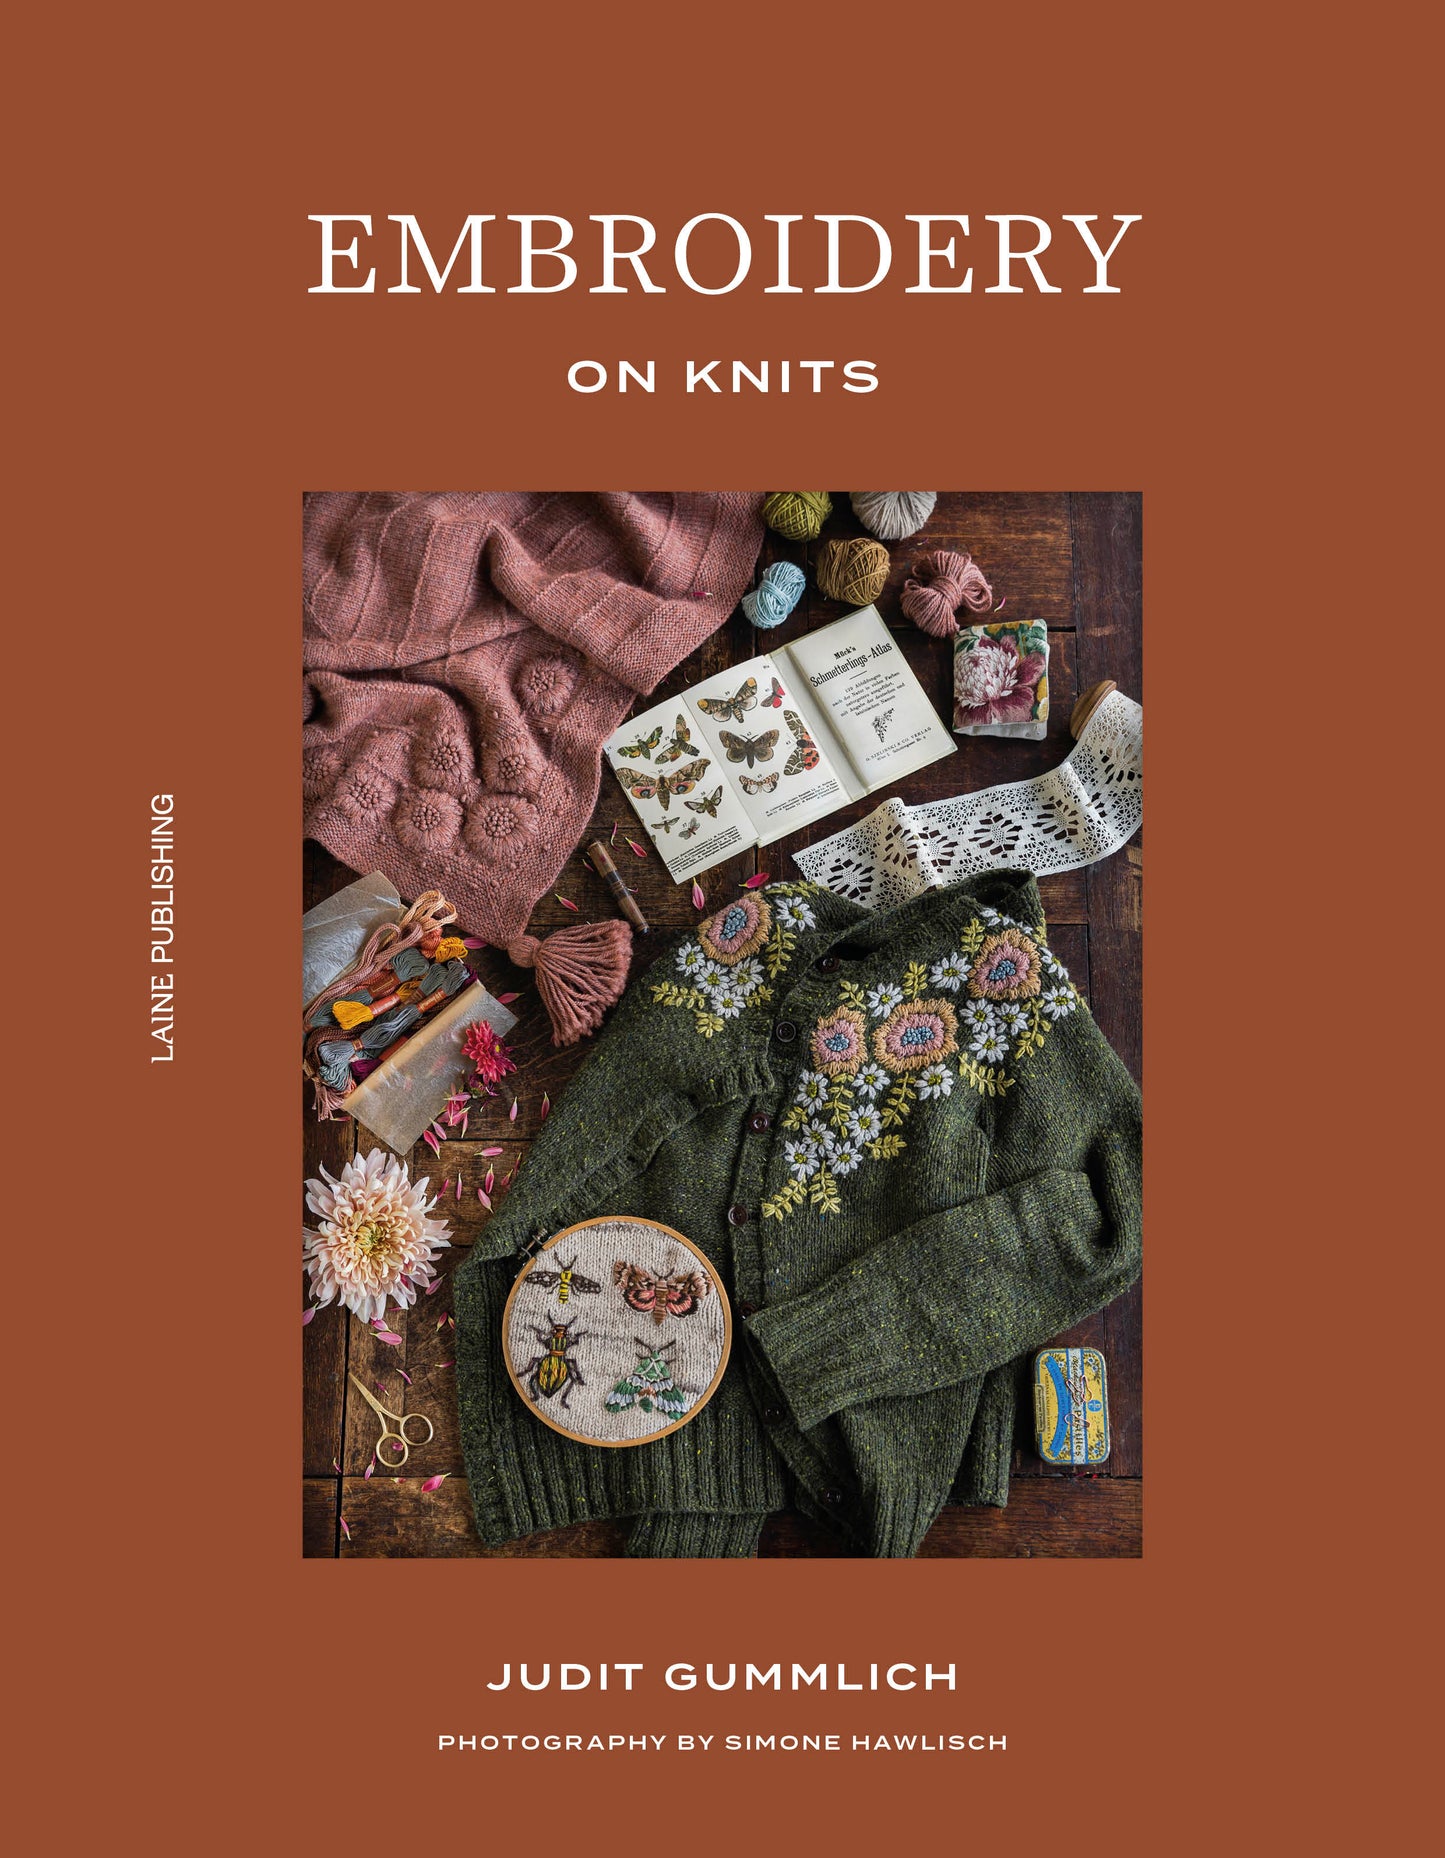 Embroidery on Knits - Book by Judit Gummlich, Laine Publishing